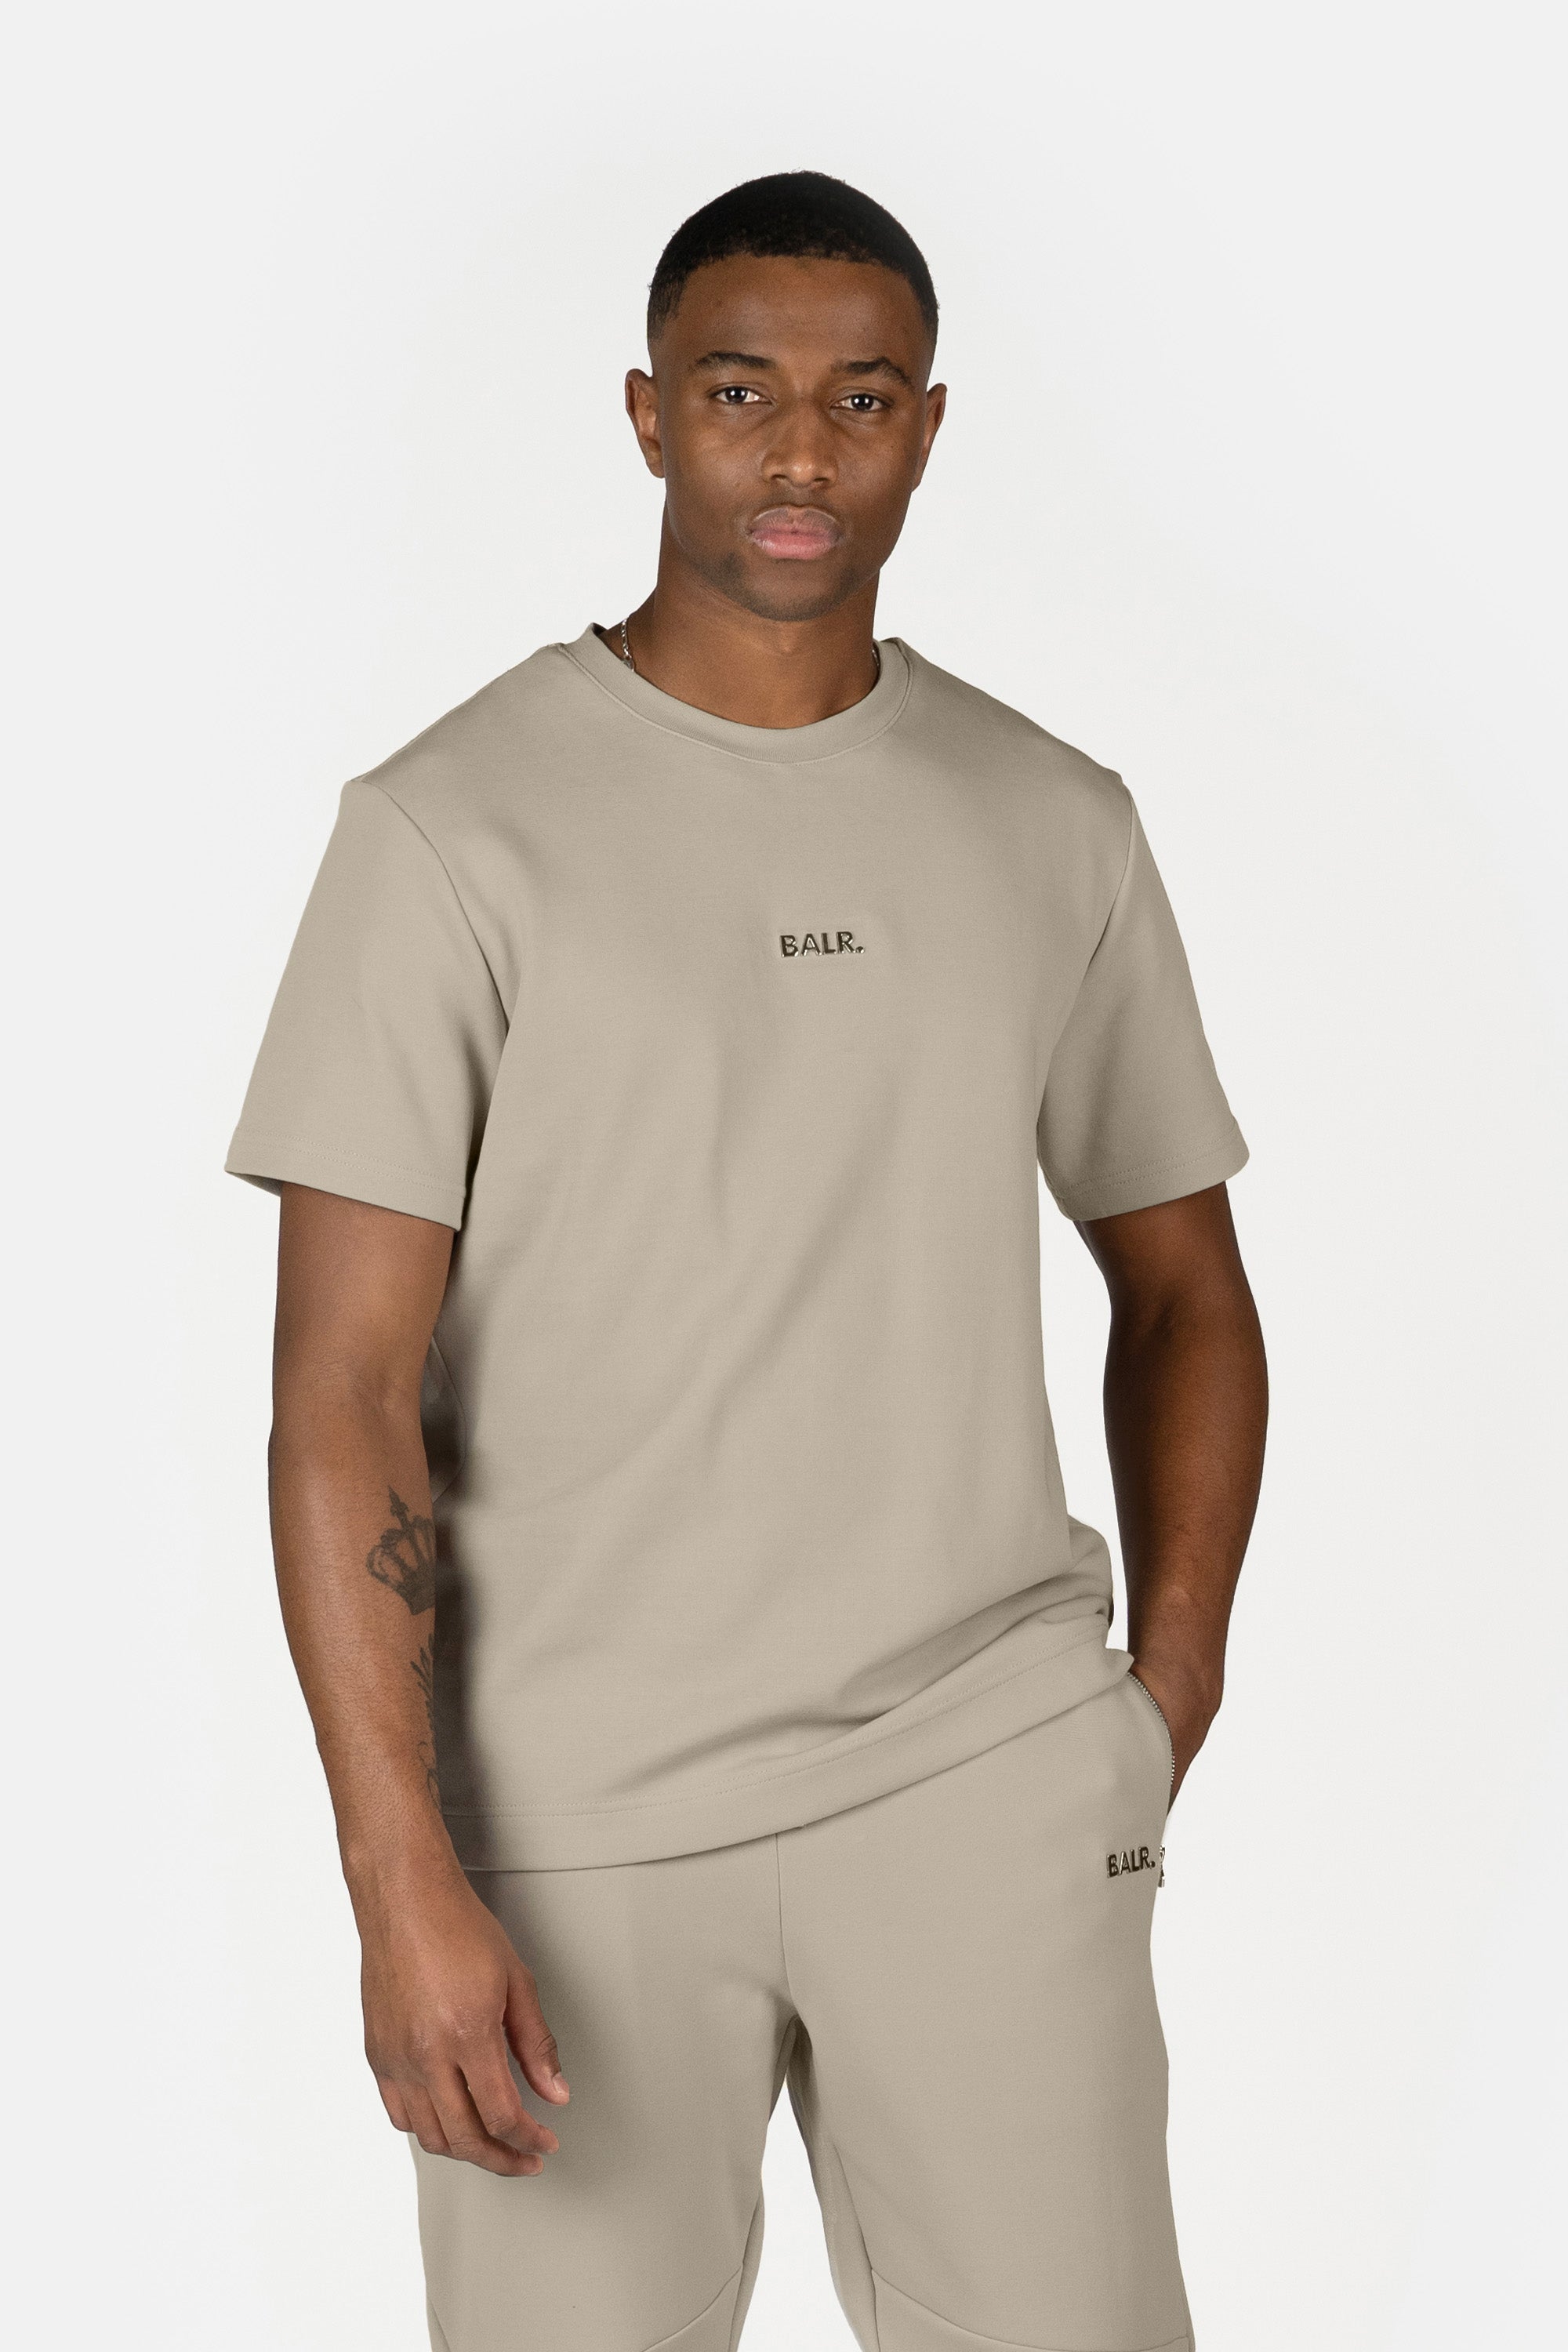 Silver Lining - T-Shirt for Men